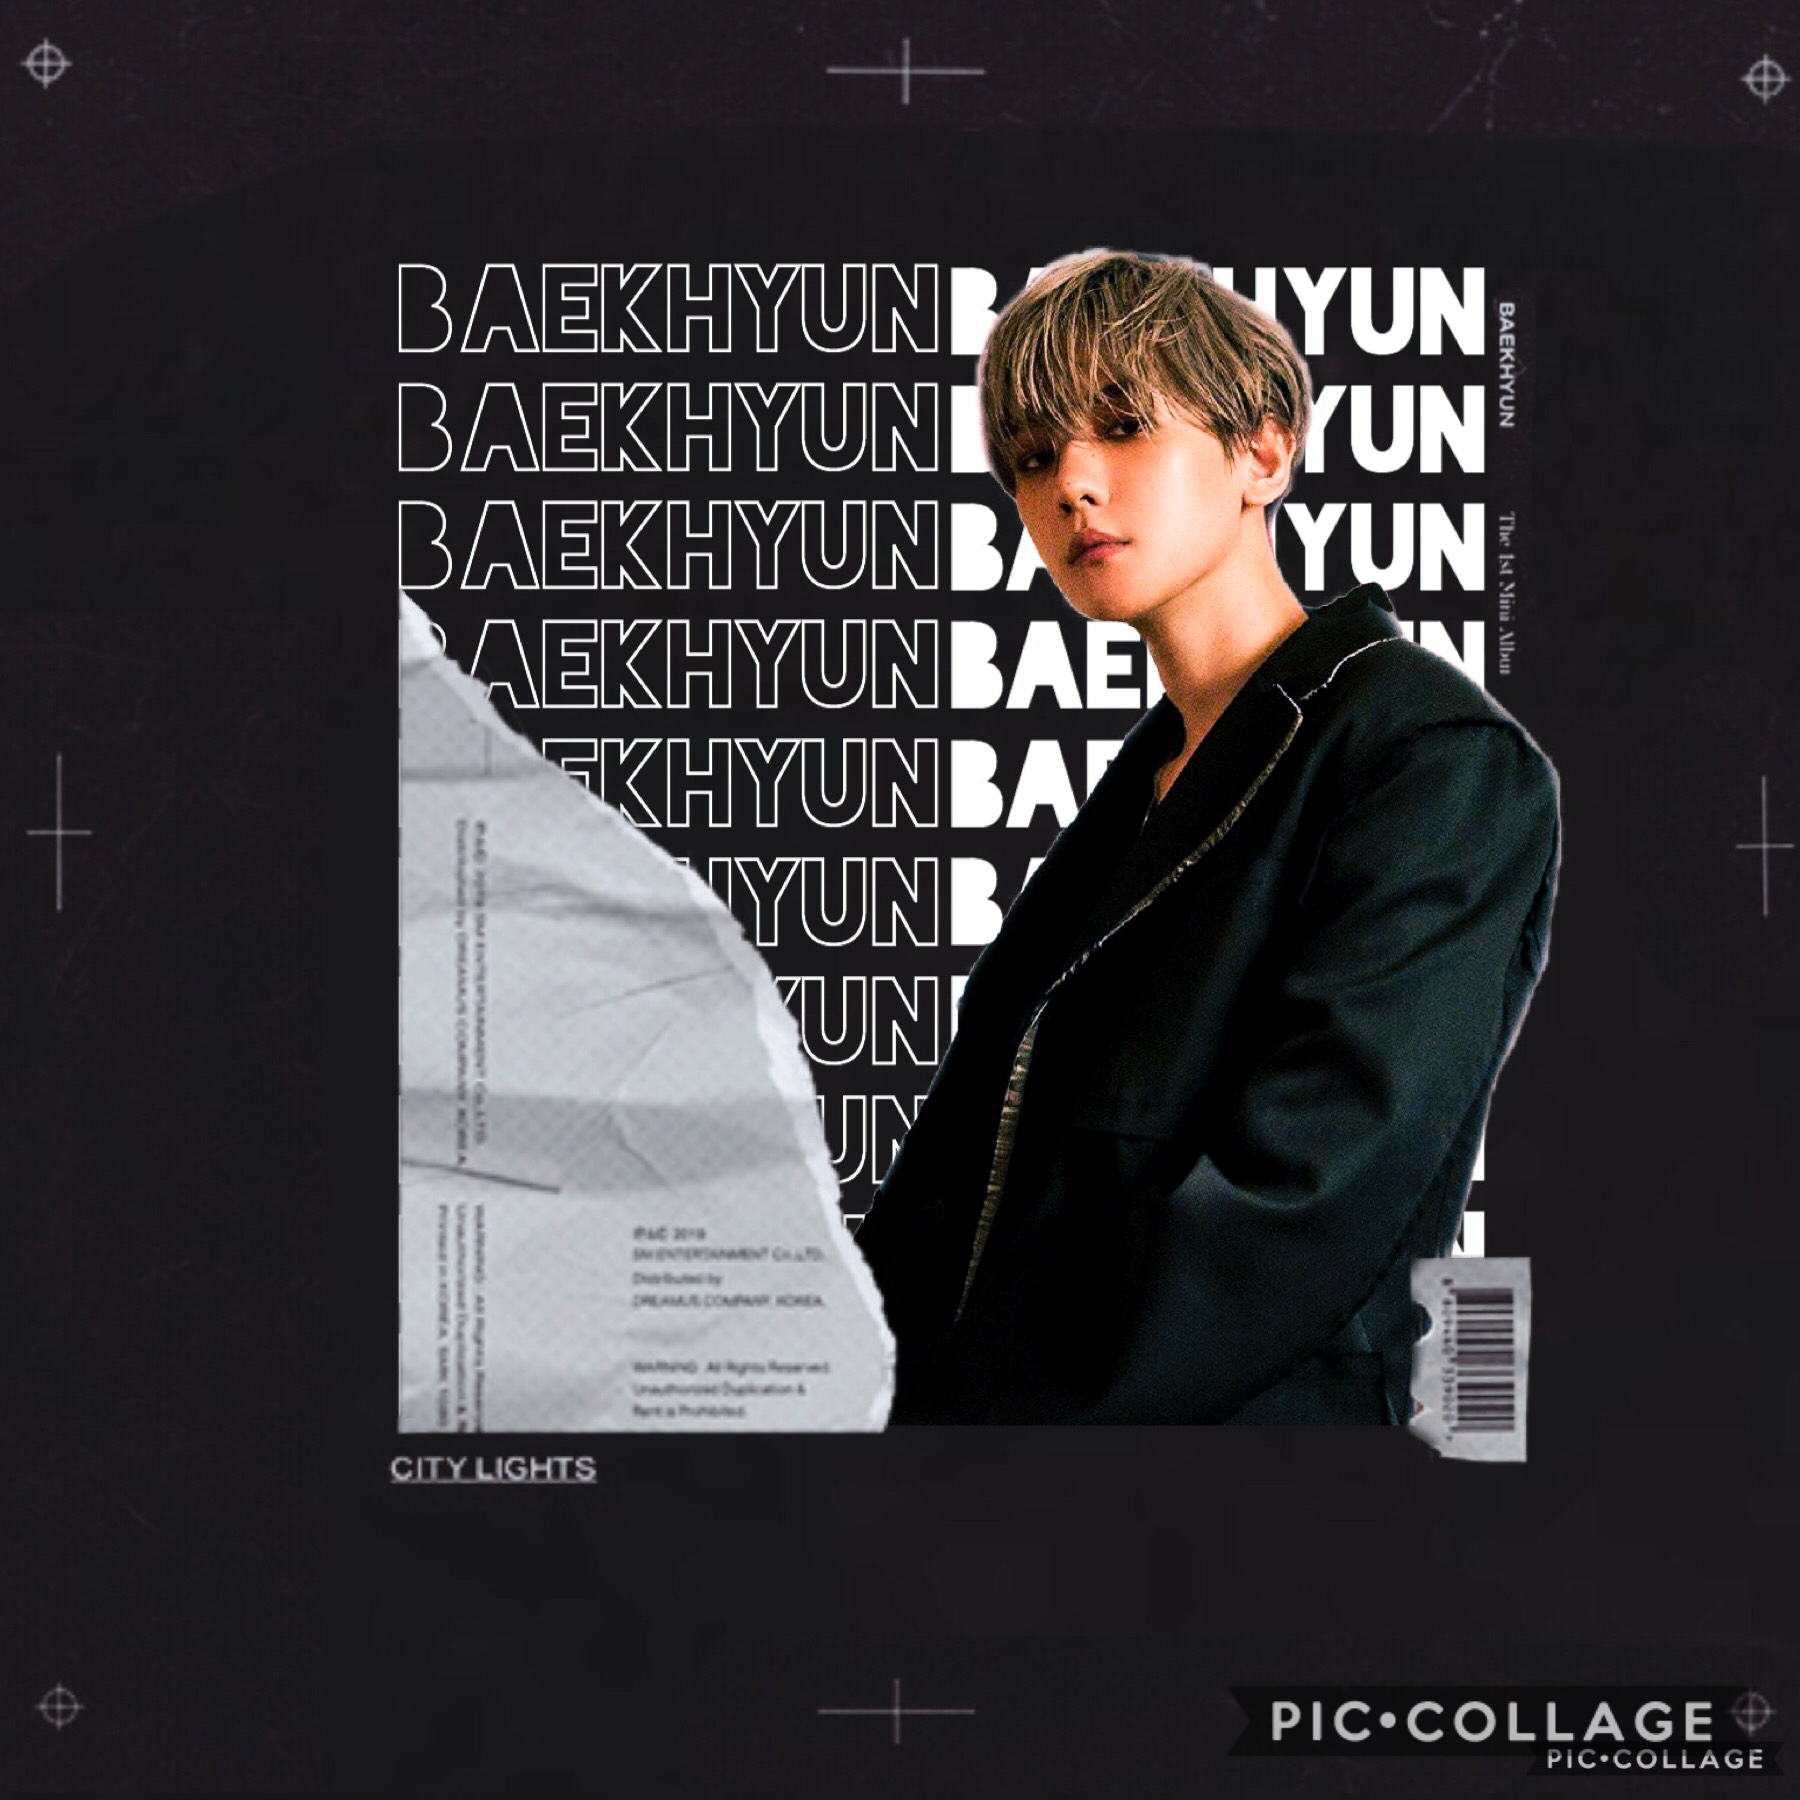 Baekhyun-city lights, first mini album 

I’ve legit been obsessed with all his songs

I don’t even know how to feel about this edit, I used PicsArt and it was a struggle 

Check the remixes please!

Qotd: what’s your fave song that baekhyun has released

